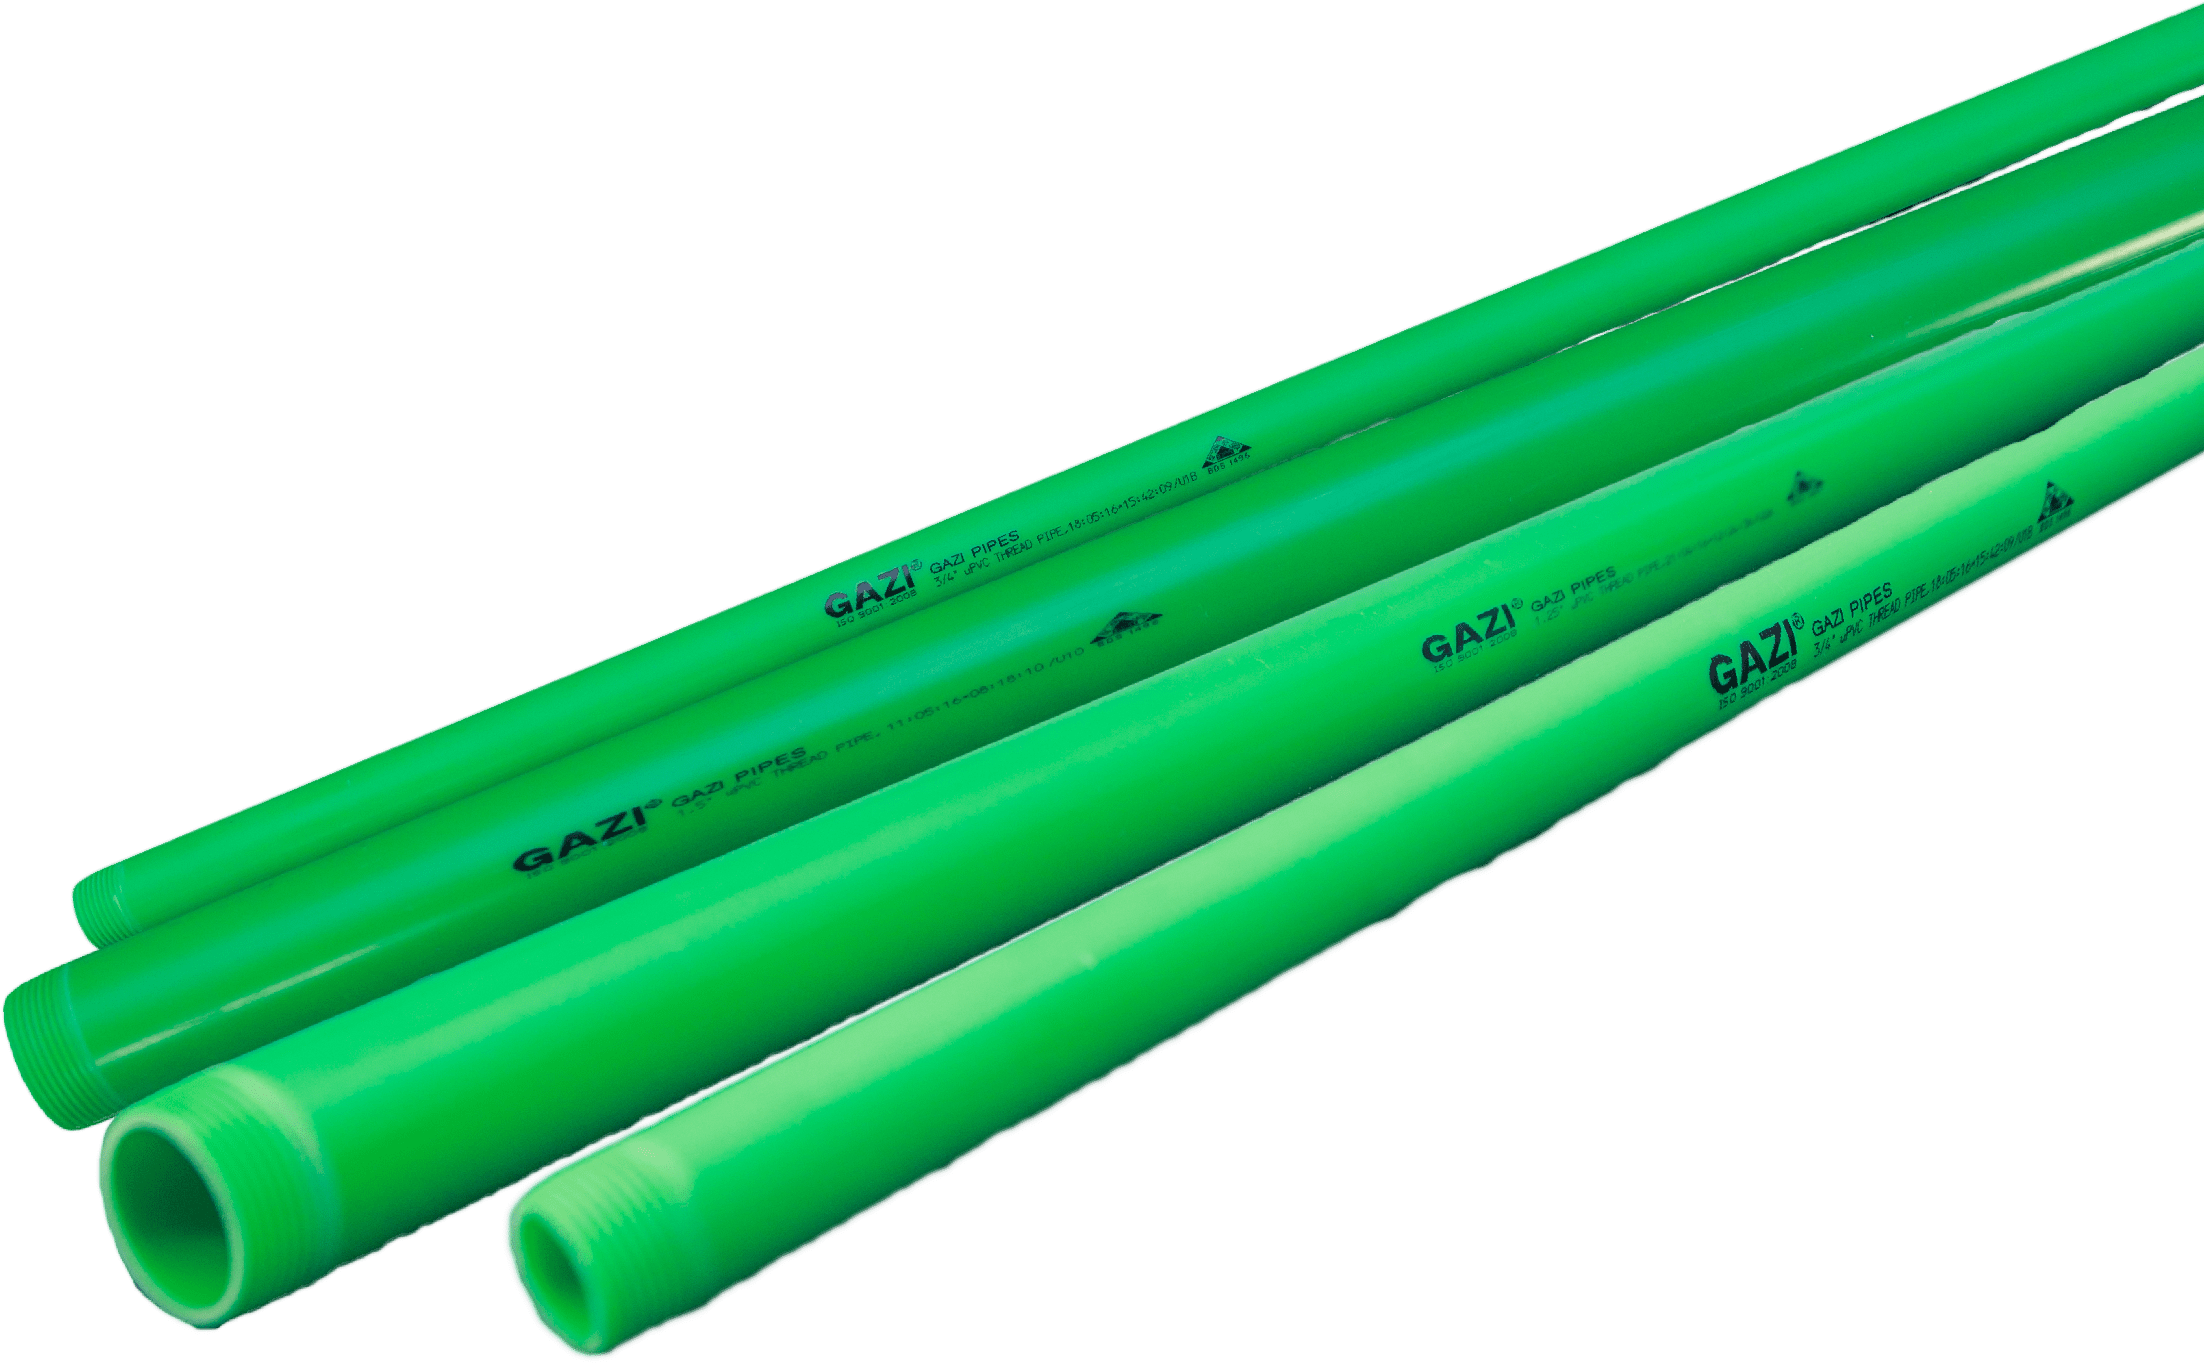 A Group Of Green Plastic Pipes